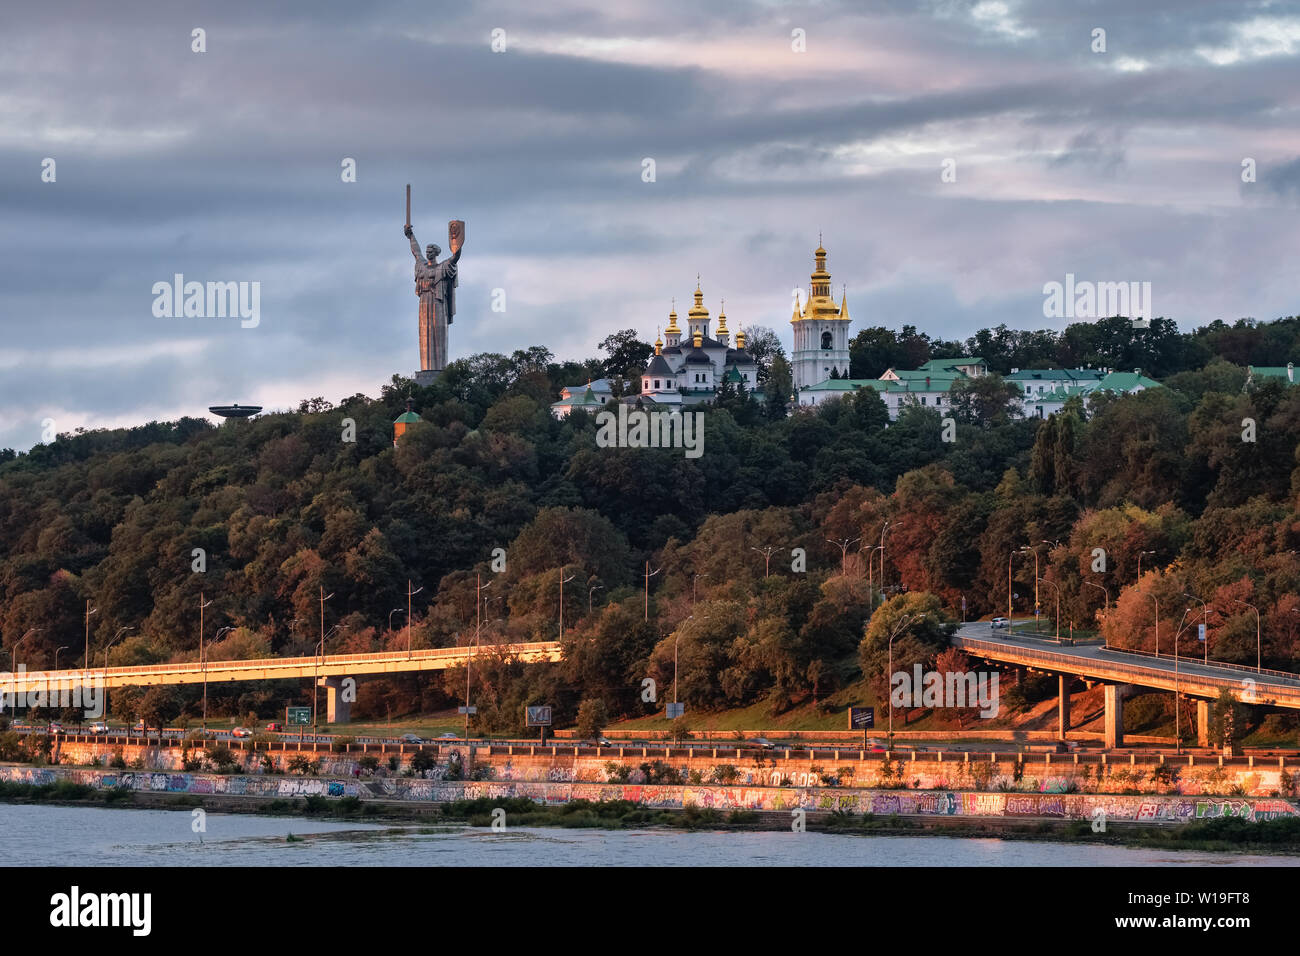 Kyiv cityscape with the view at Kiev Pechersk Lavra monastery and the Motherland Monument Stock Photo